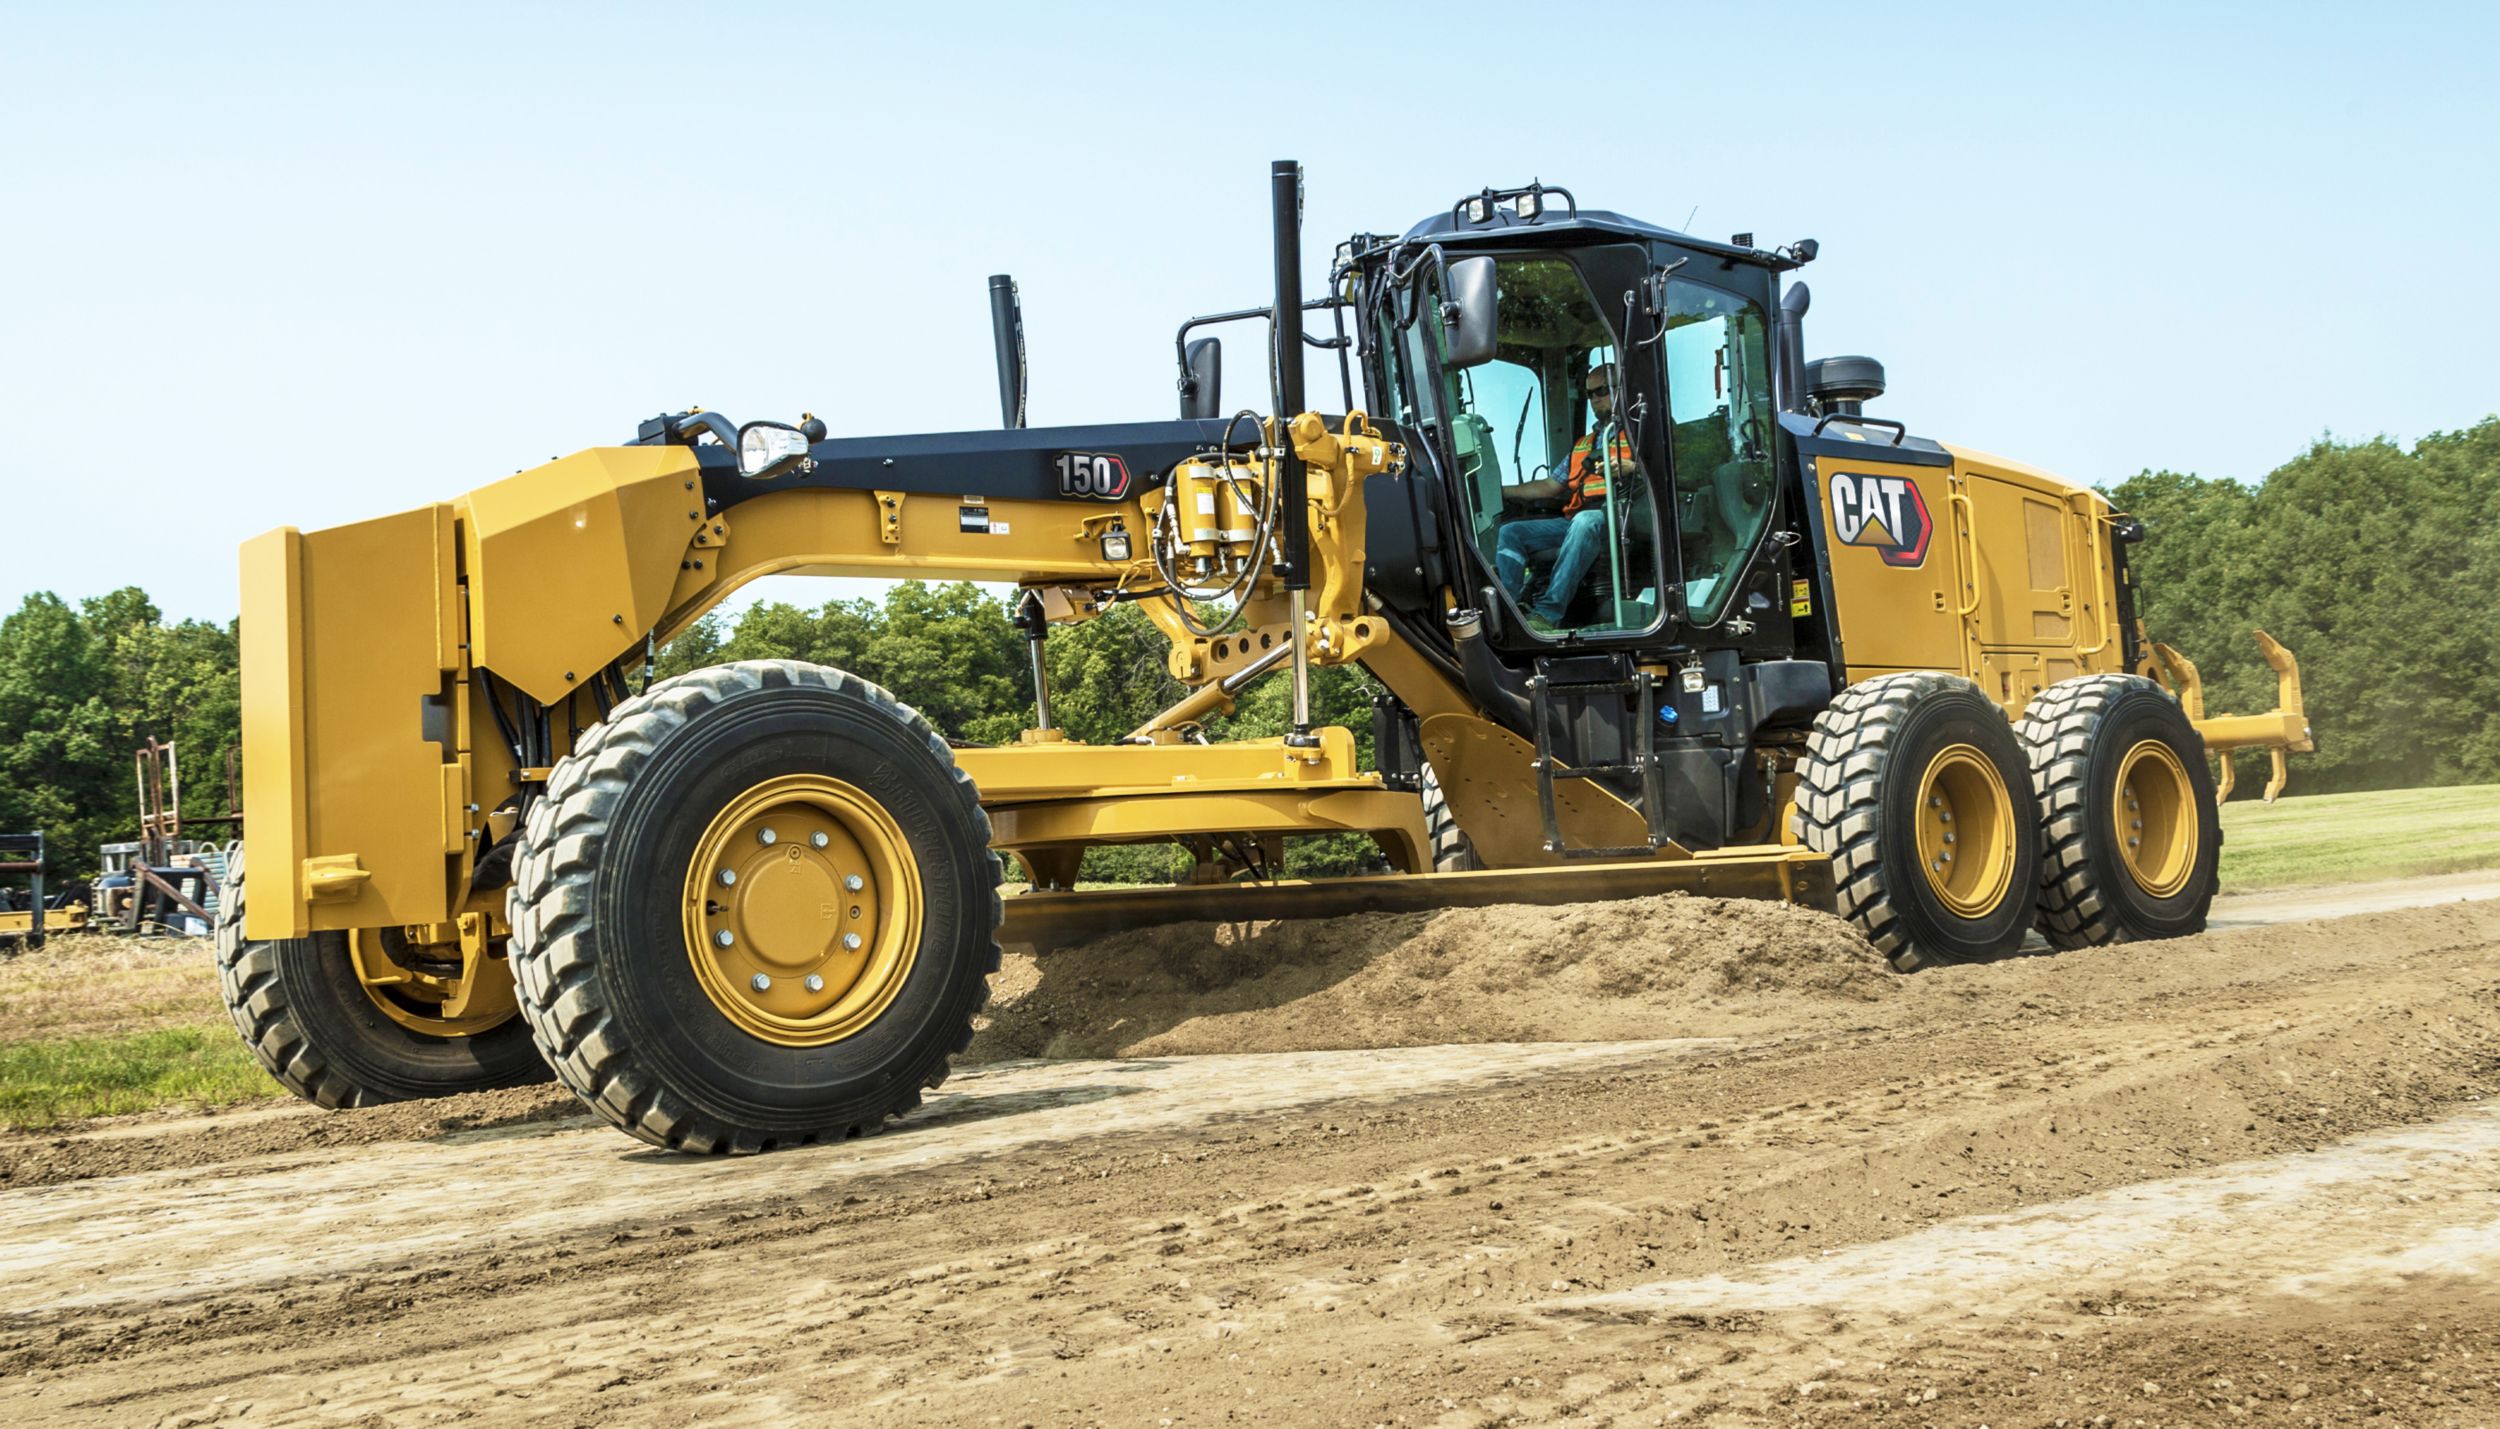 Cat 150 Motor Grader - PERFORMANCE AND PRODUCTIVITY